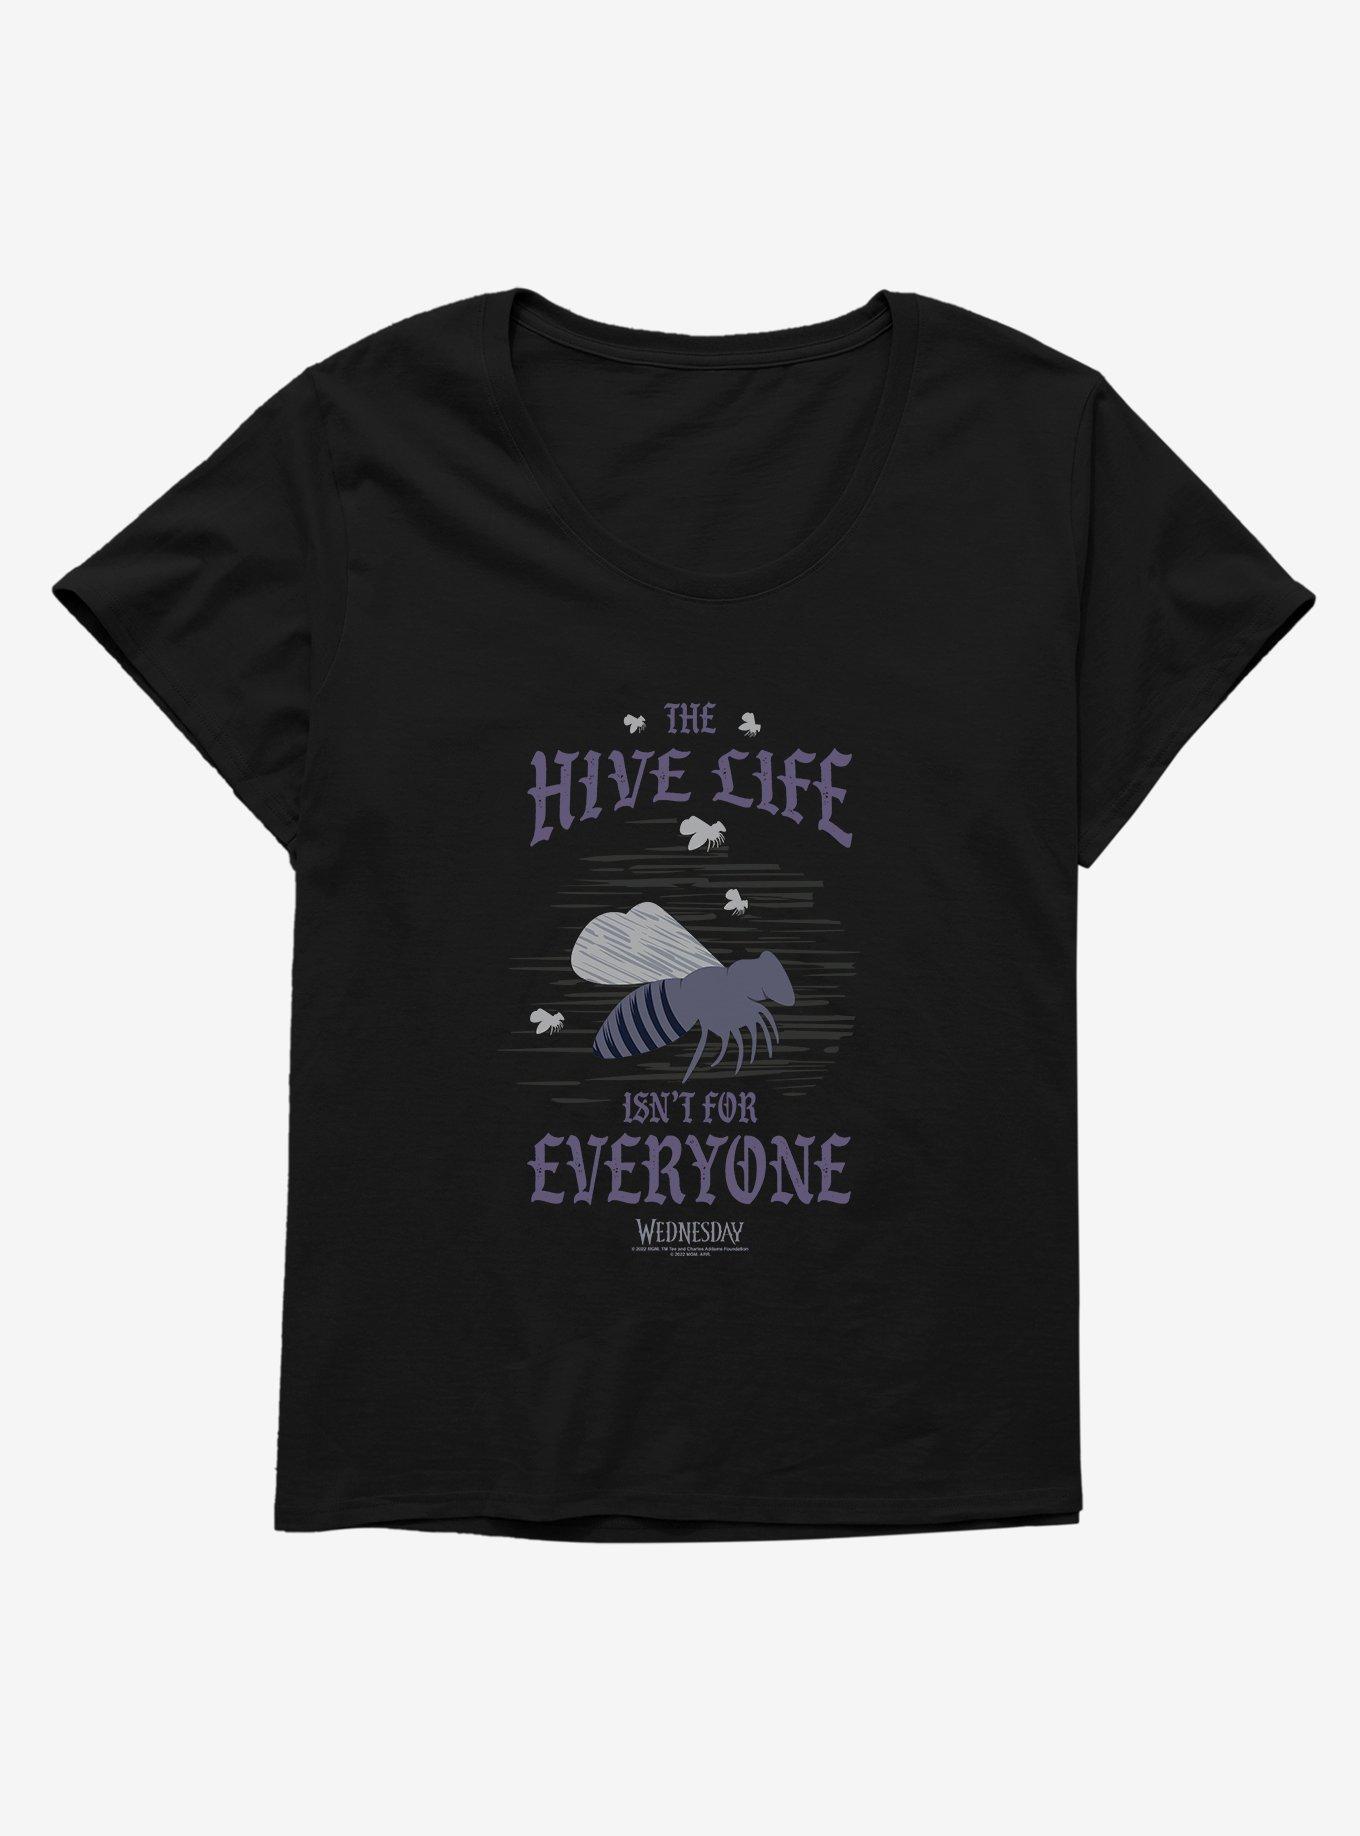 Wednesday The Hive Life Isn't For Everyone Womens T-Shirt Plus Size, BLACK, hi-res